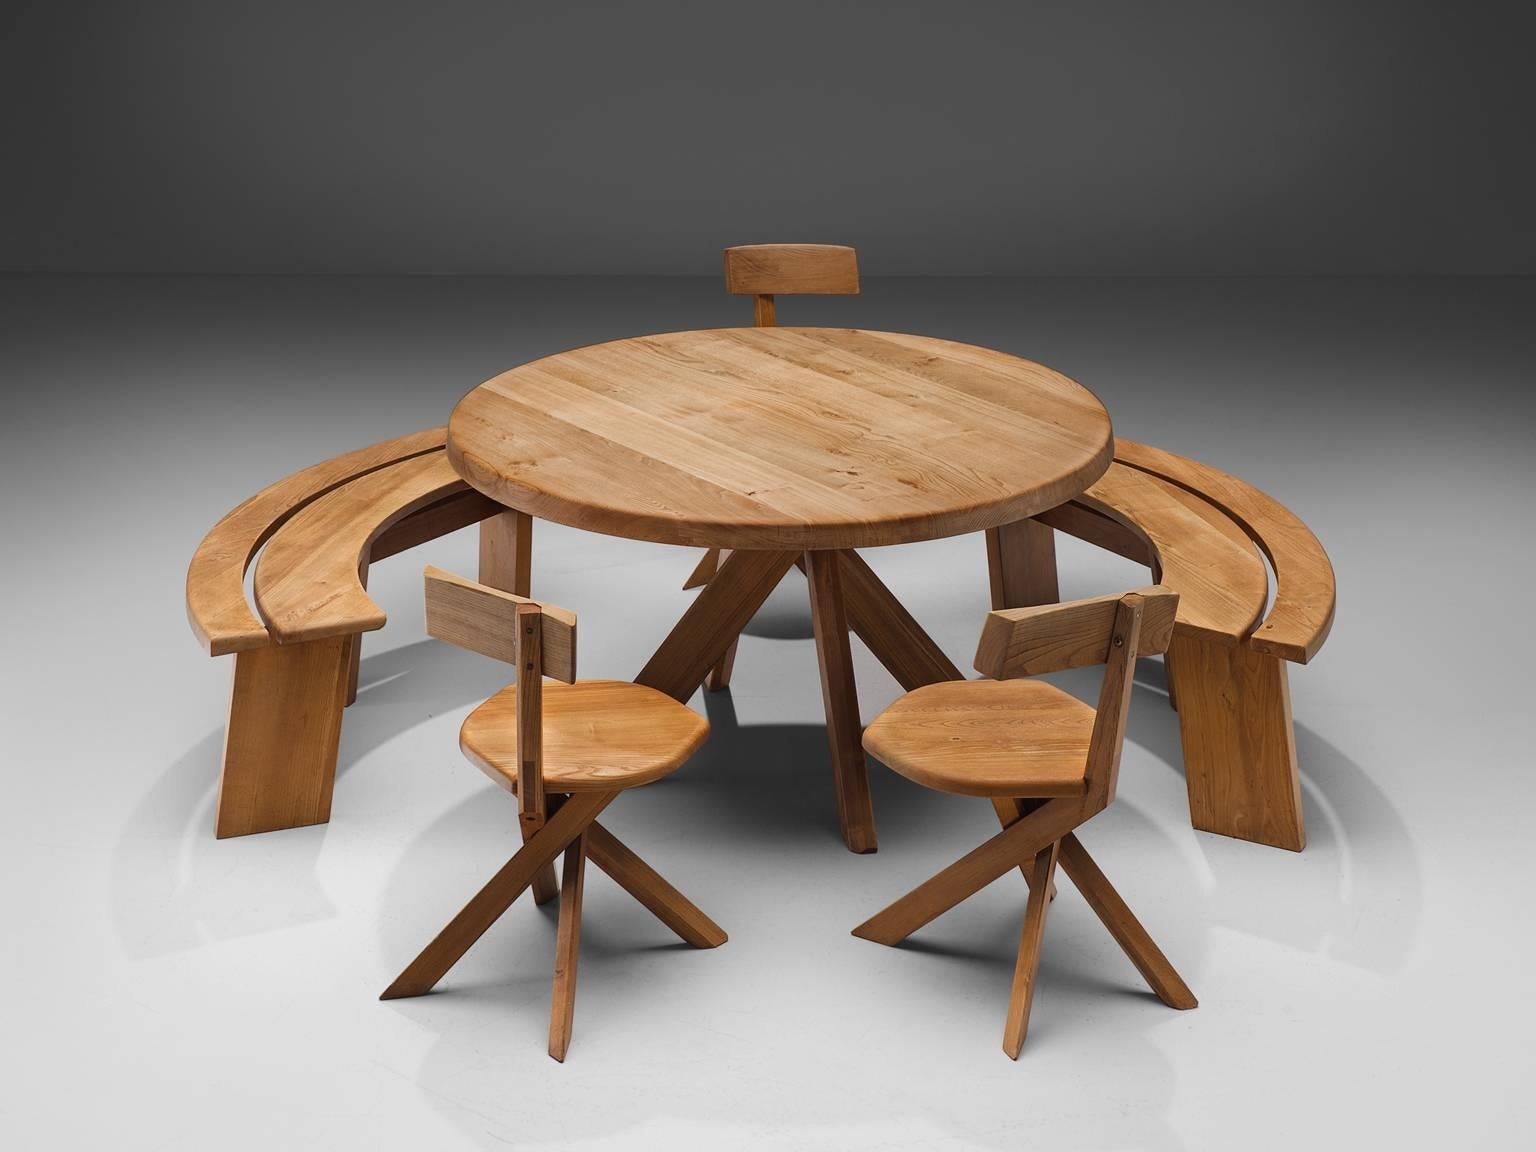 Kitchen or dining room set in solid elmwood. Designed by the French designer Pierre Chapo, 1960s.

Very well crafted round pedestal T21B table, 2 quarter round S38 bench and 3 S34 chairs, all in good condition. The basic design and constructions, as